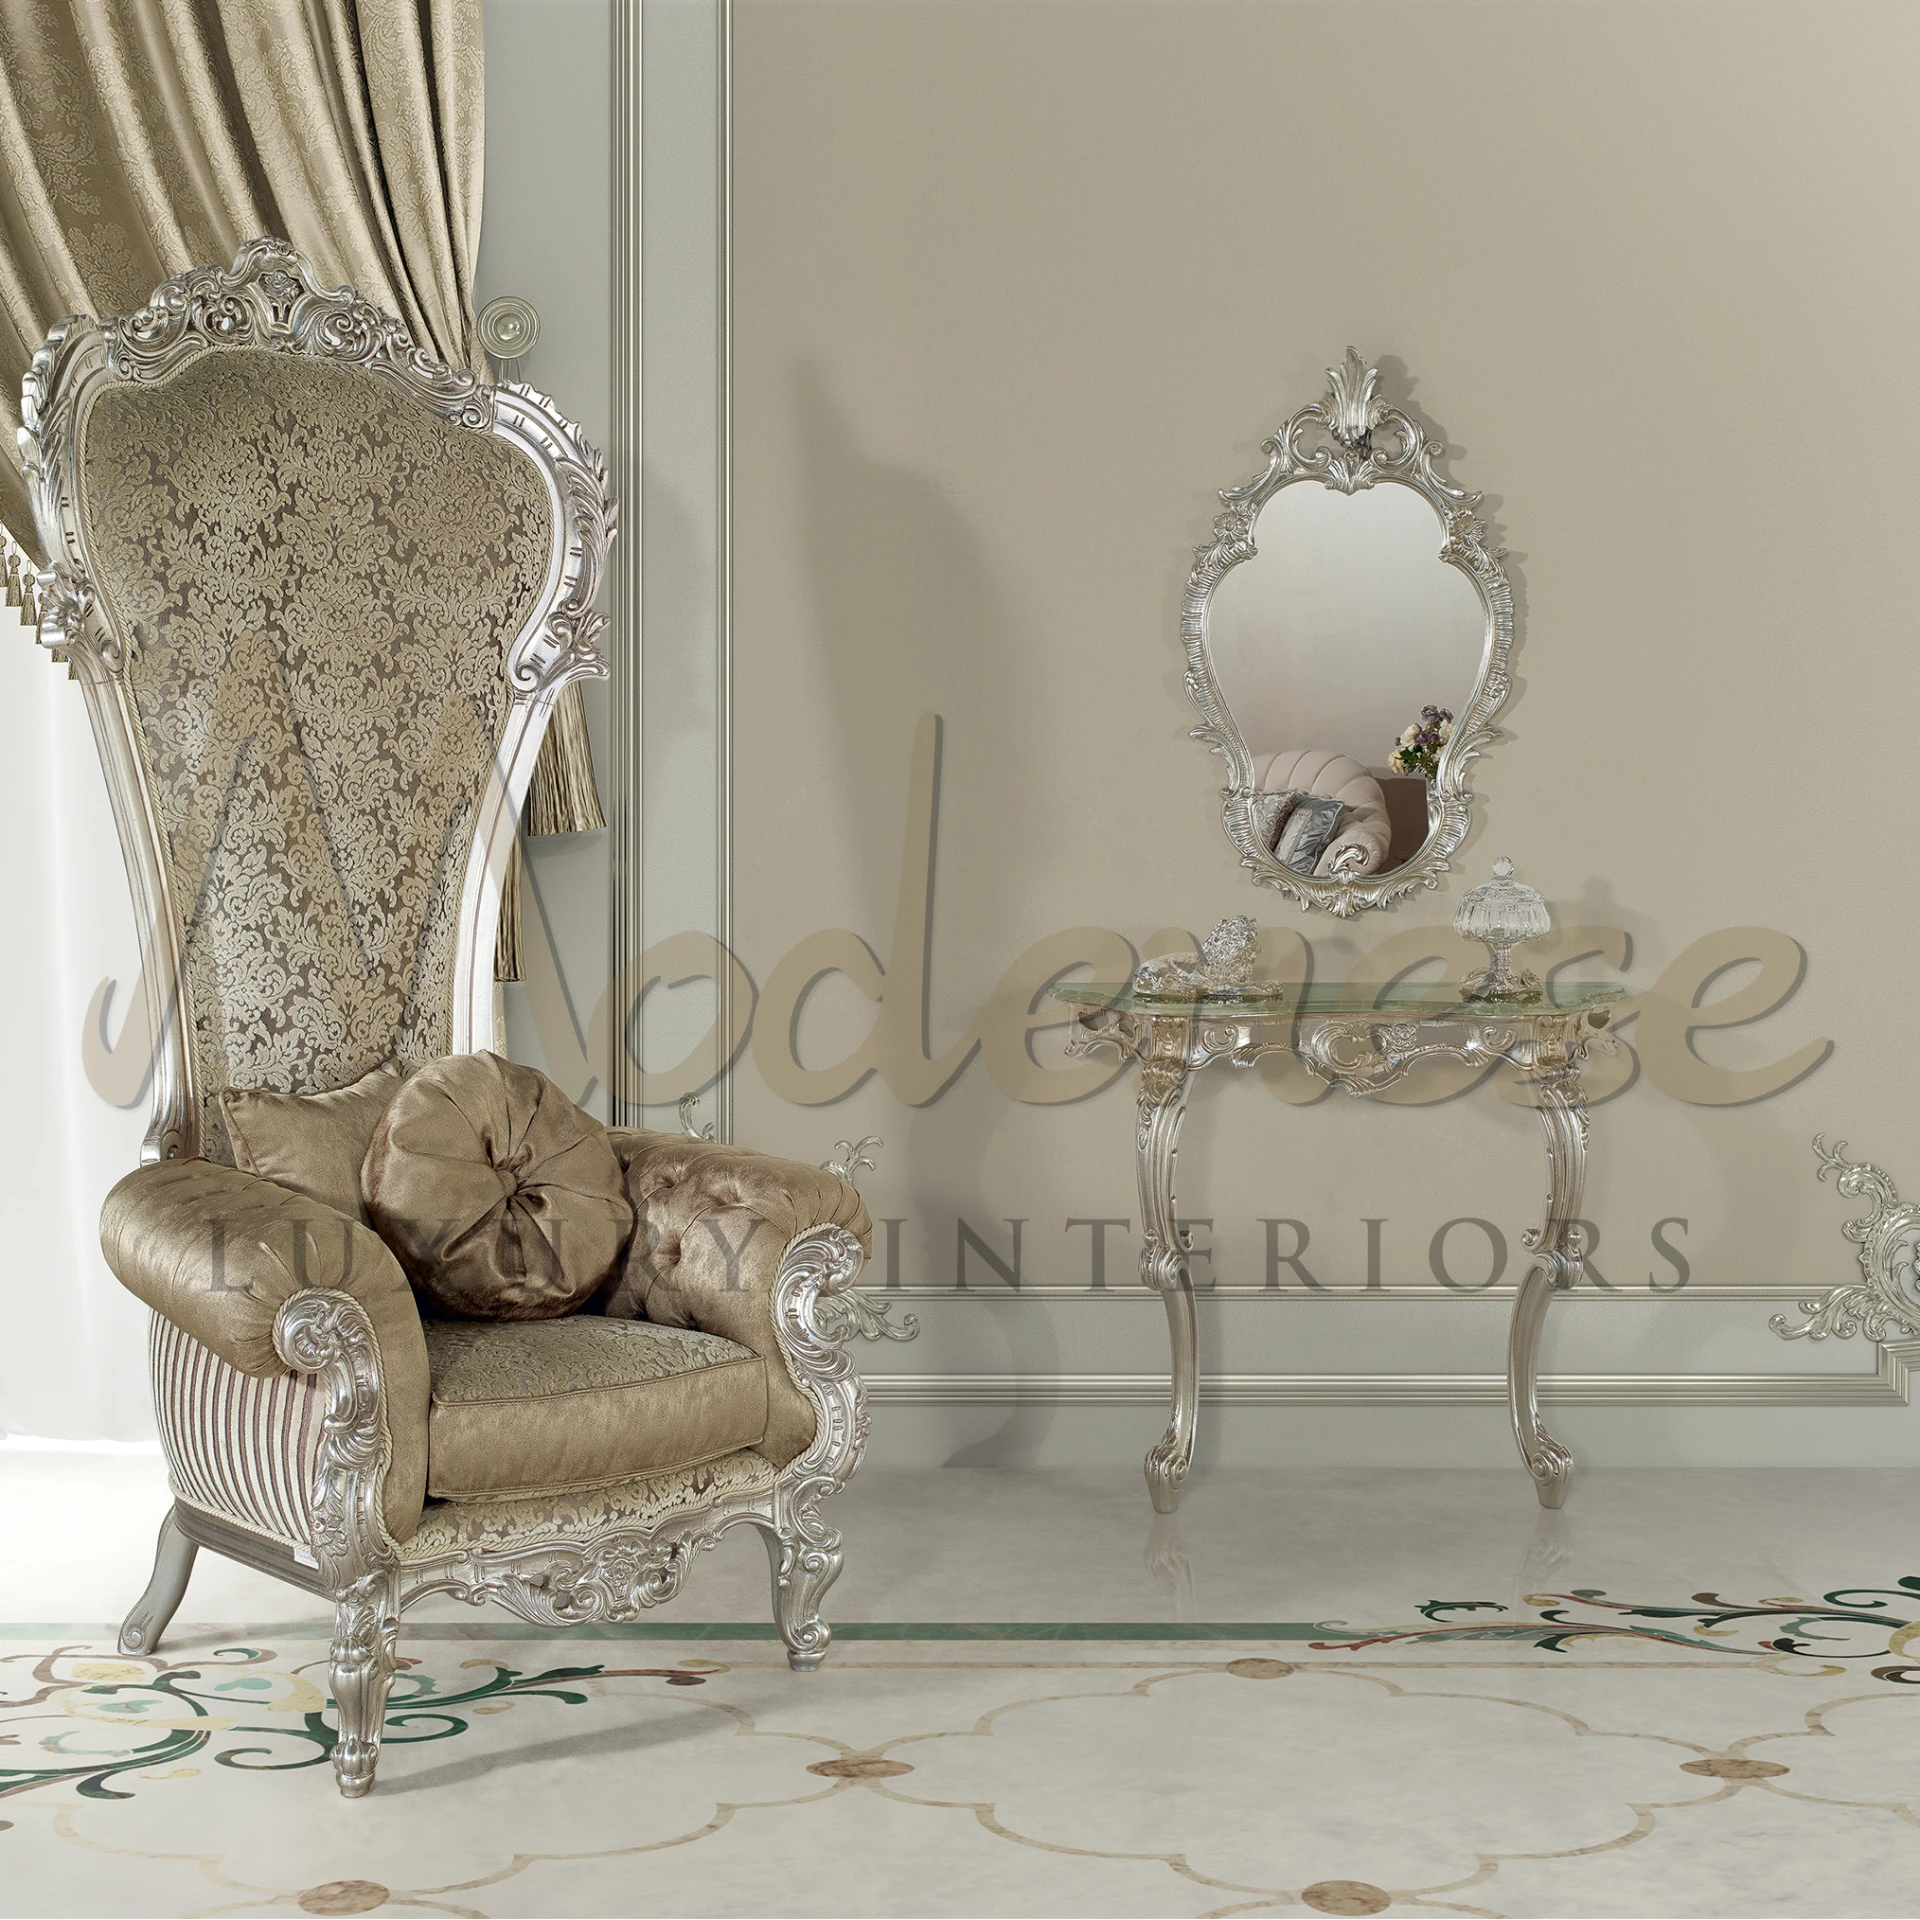 Royal Throne Armchair upholstered in brocade, with tufted details and ornate metalwork, fit for a king or queen's decor.